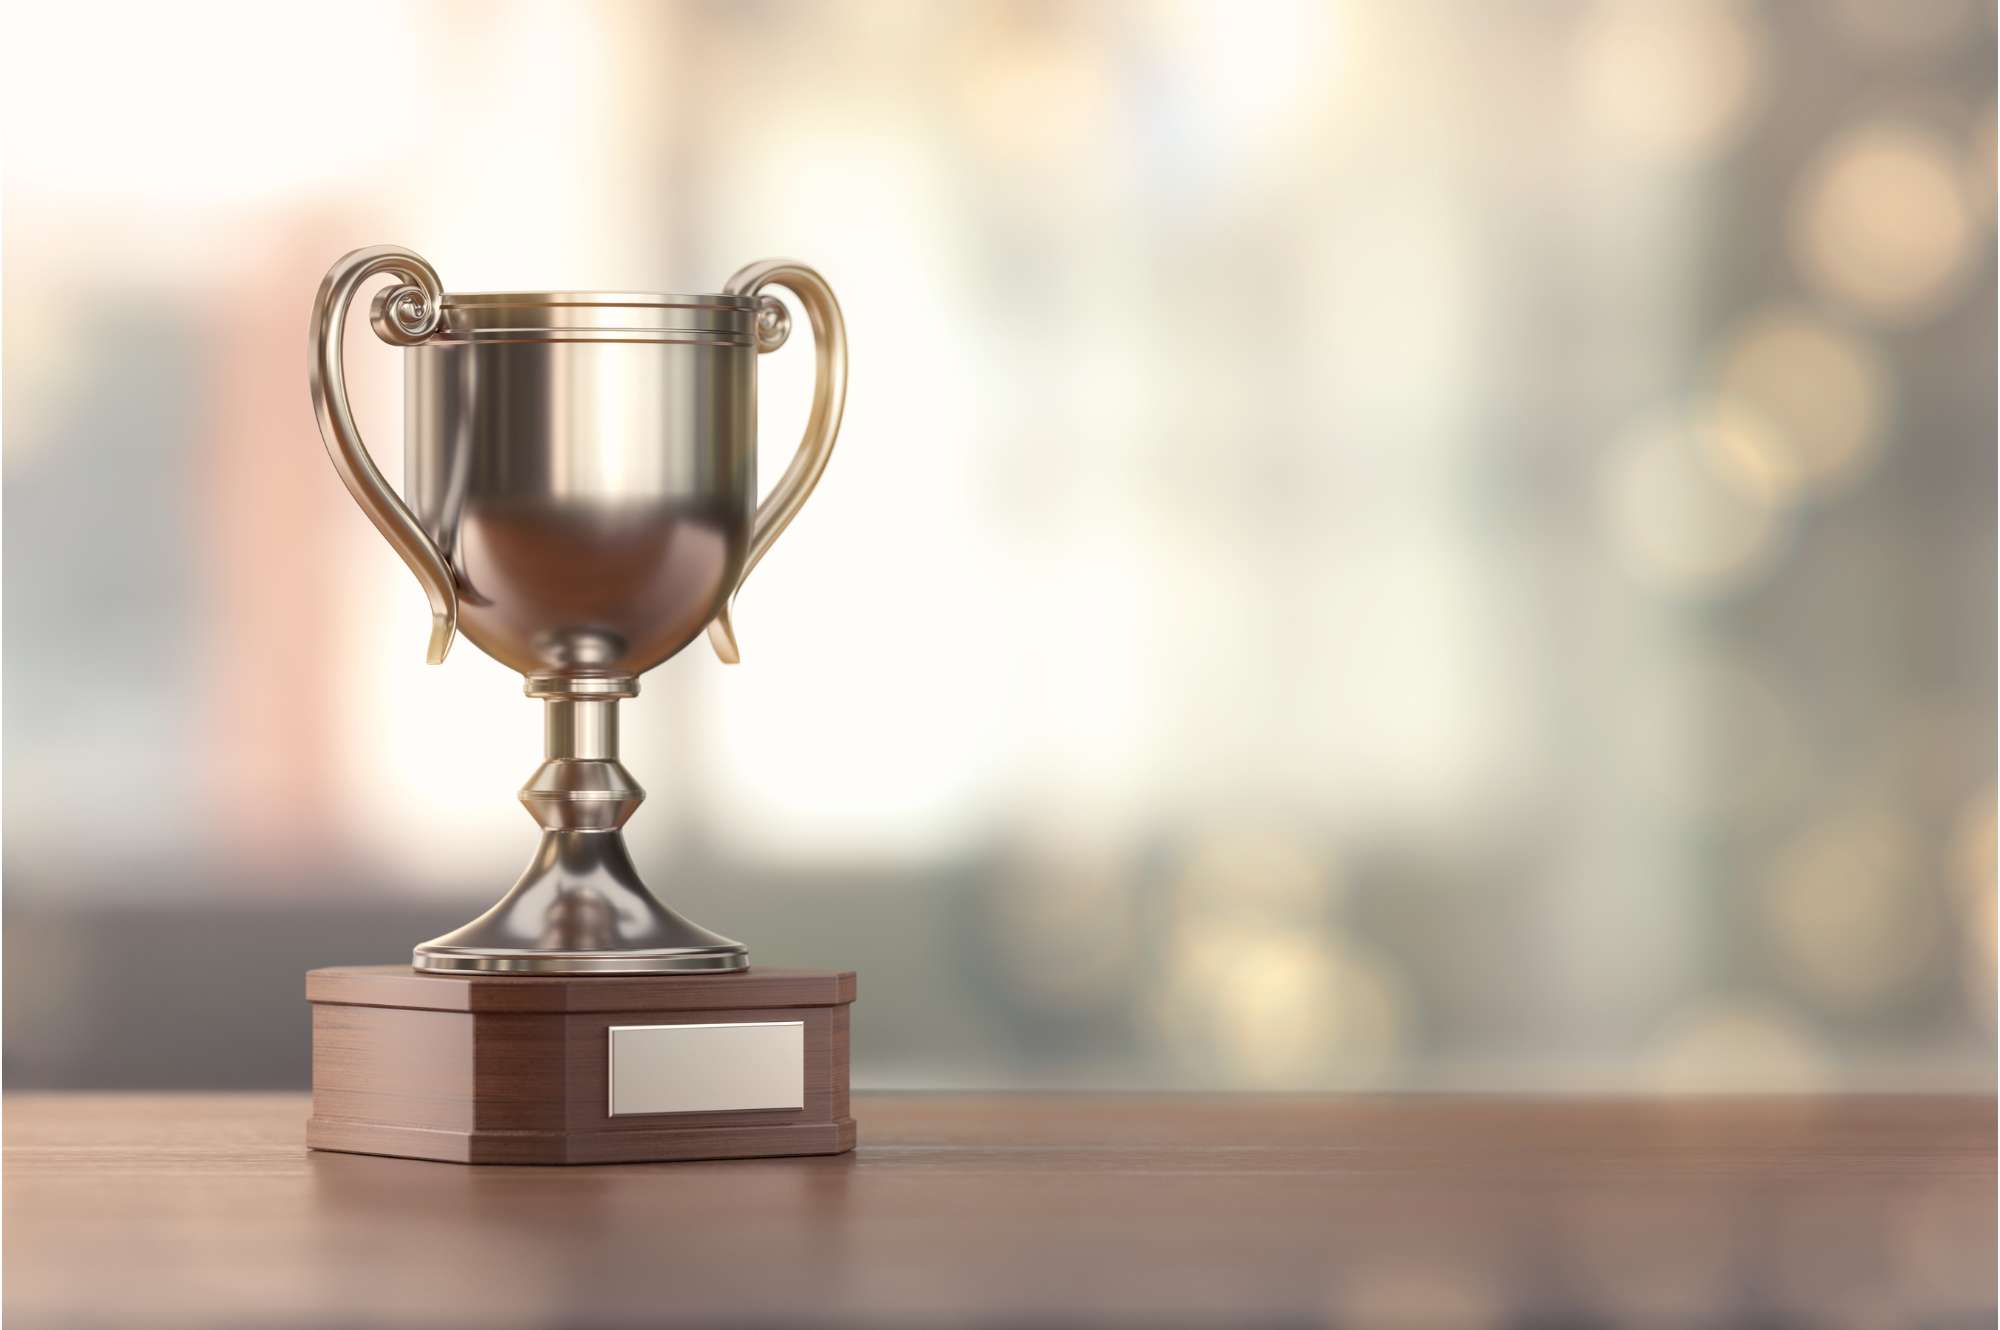 Image of a silver trophy on a desk